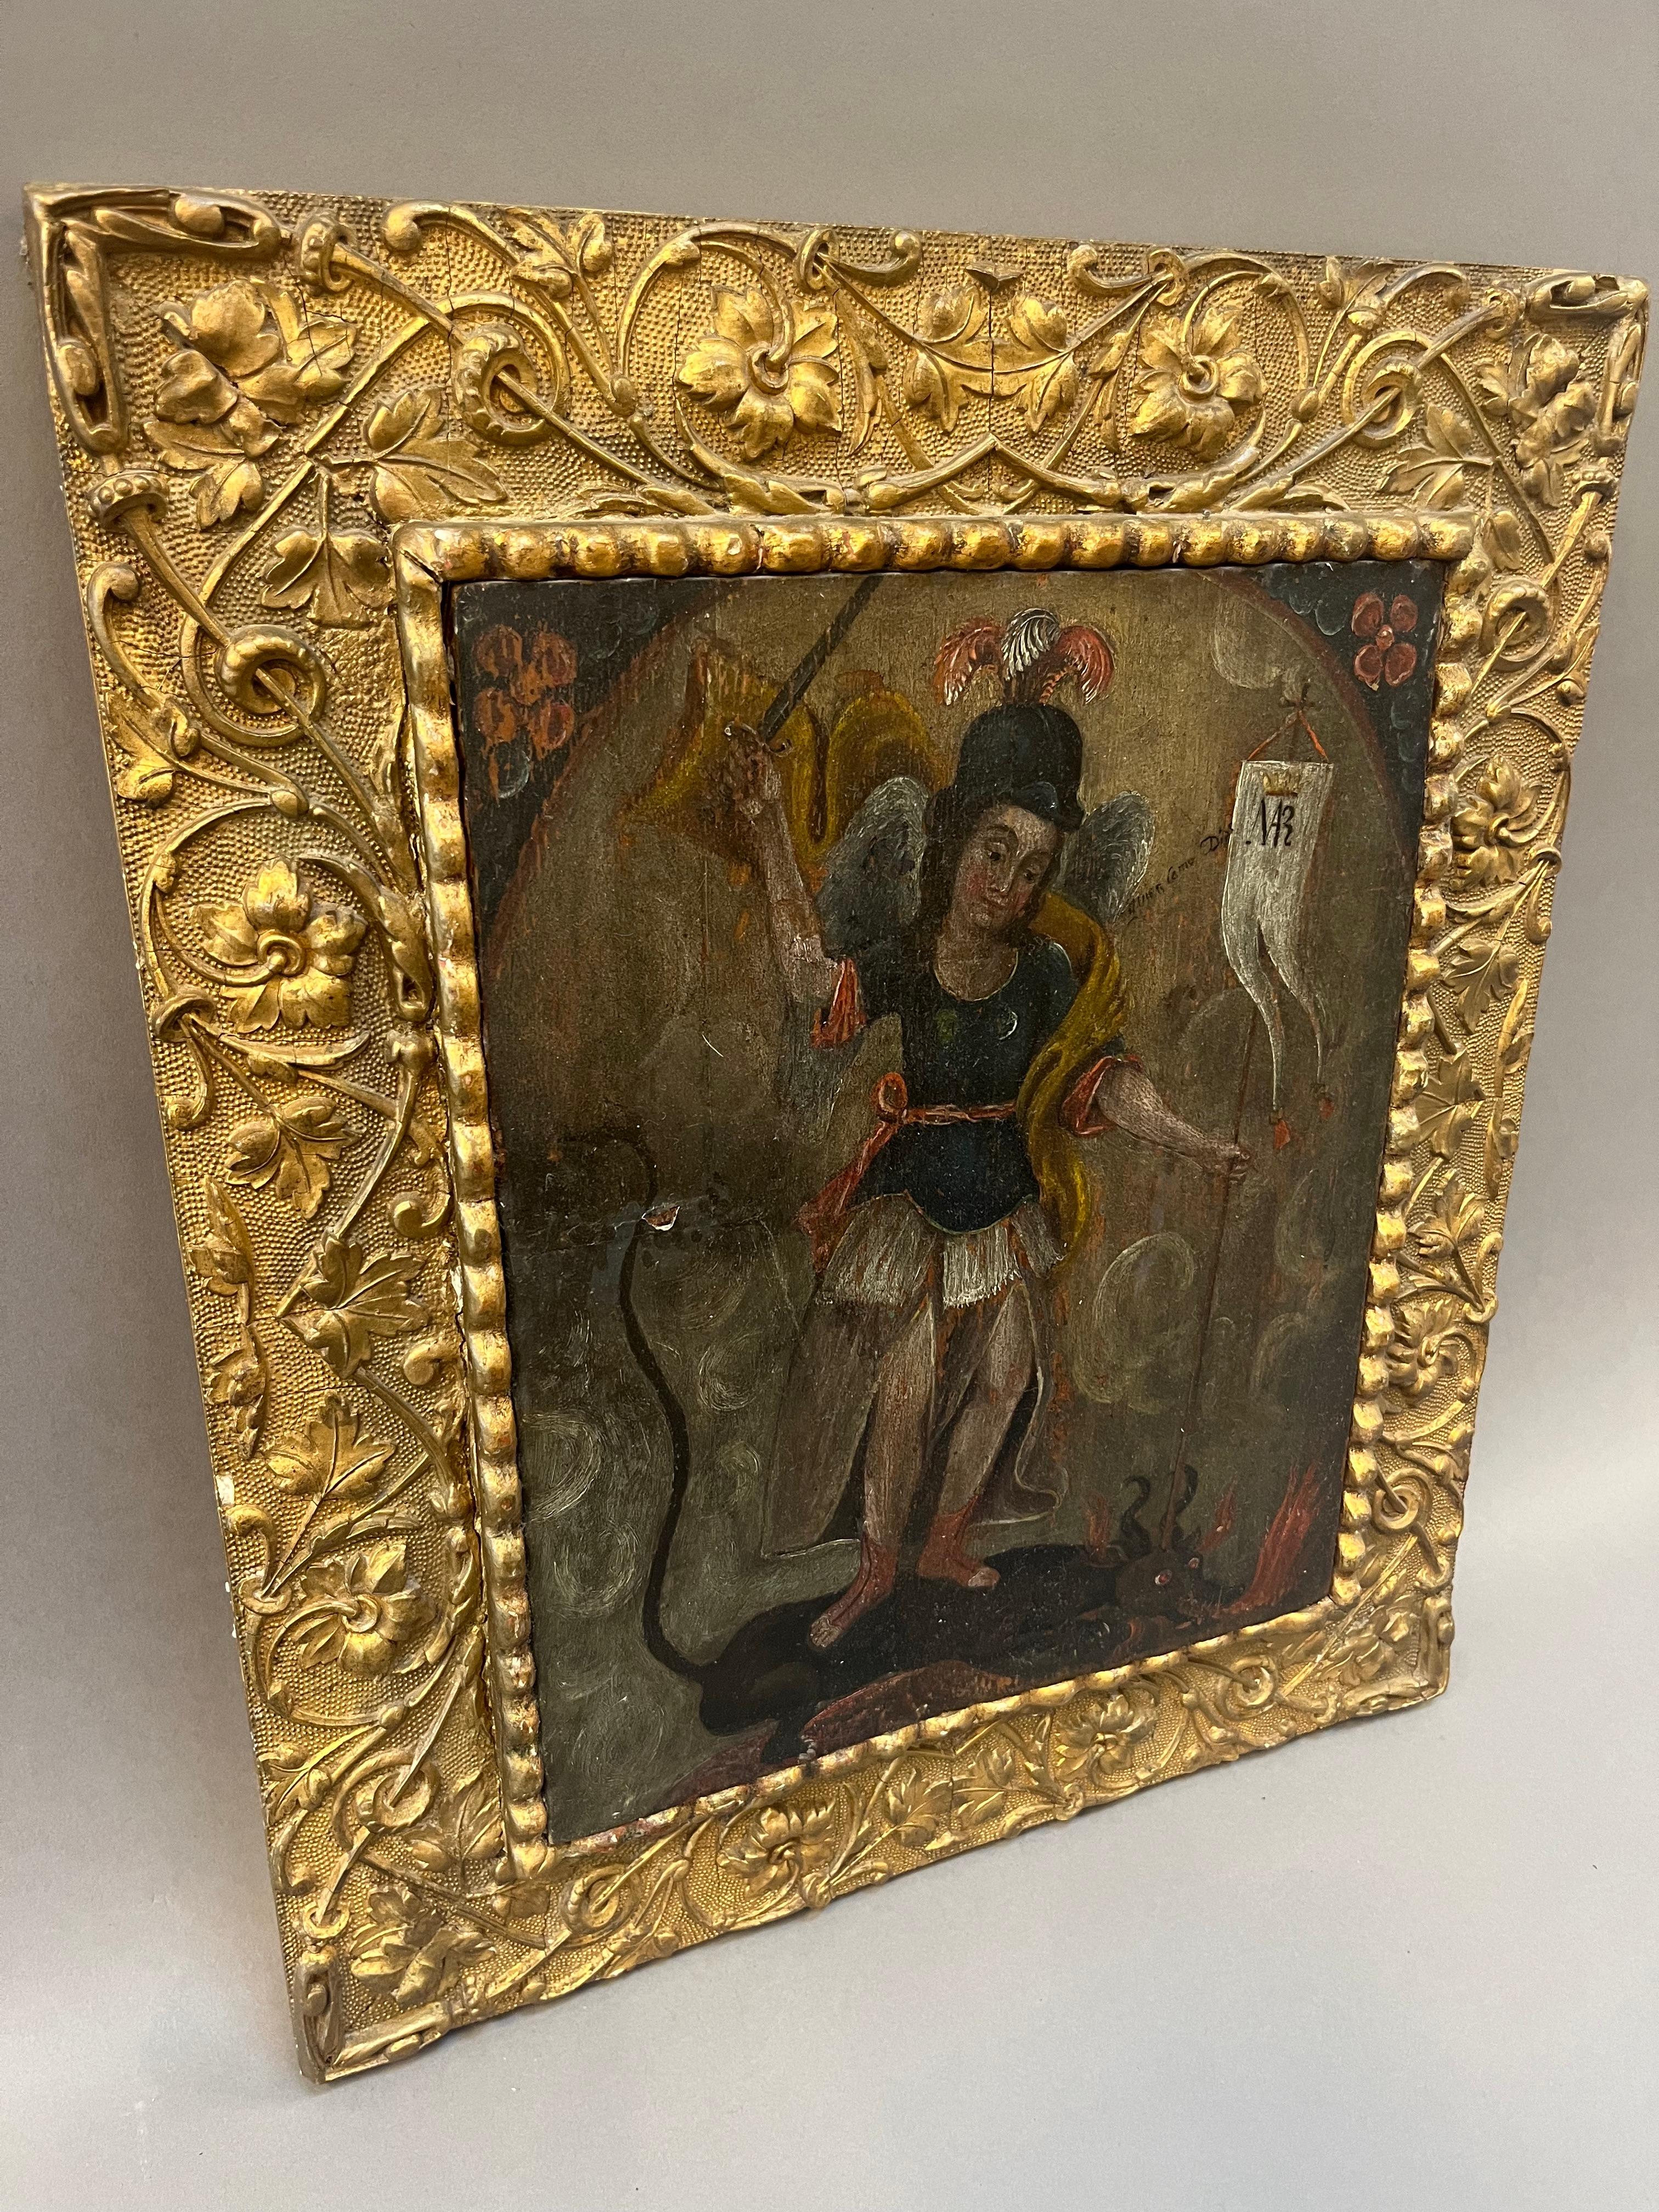 17th century Spanish Colonial Peruvian painting. Cusco school, oil on wooden panel depicting “Saint George and the Dragon” with intricate 19th Century carved and gilt frame. Cusco Peru Circa 1650.